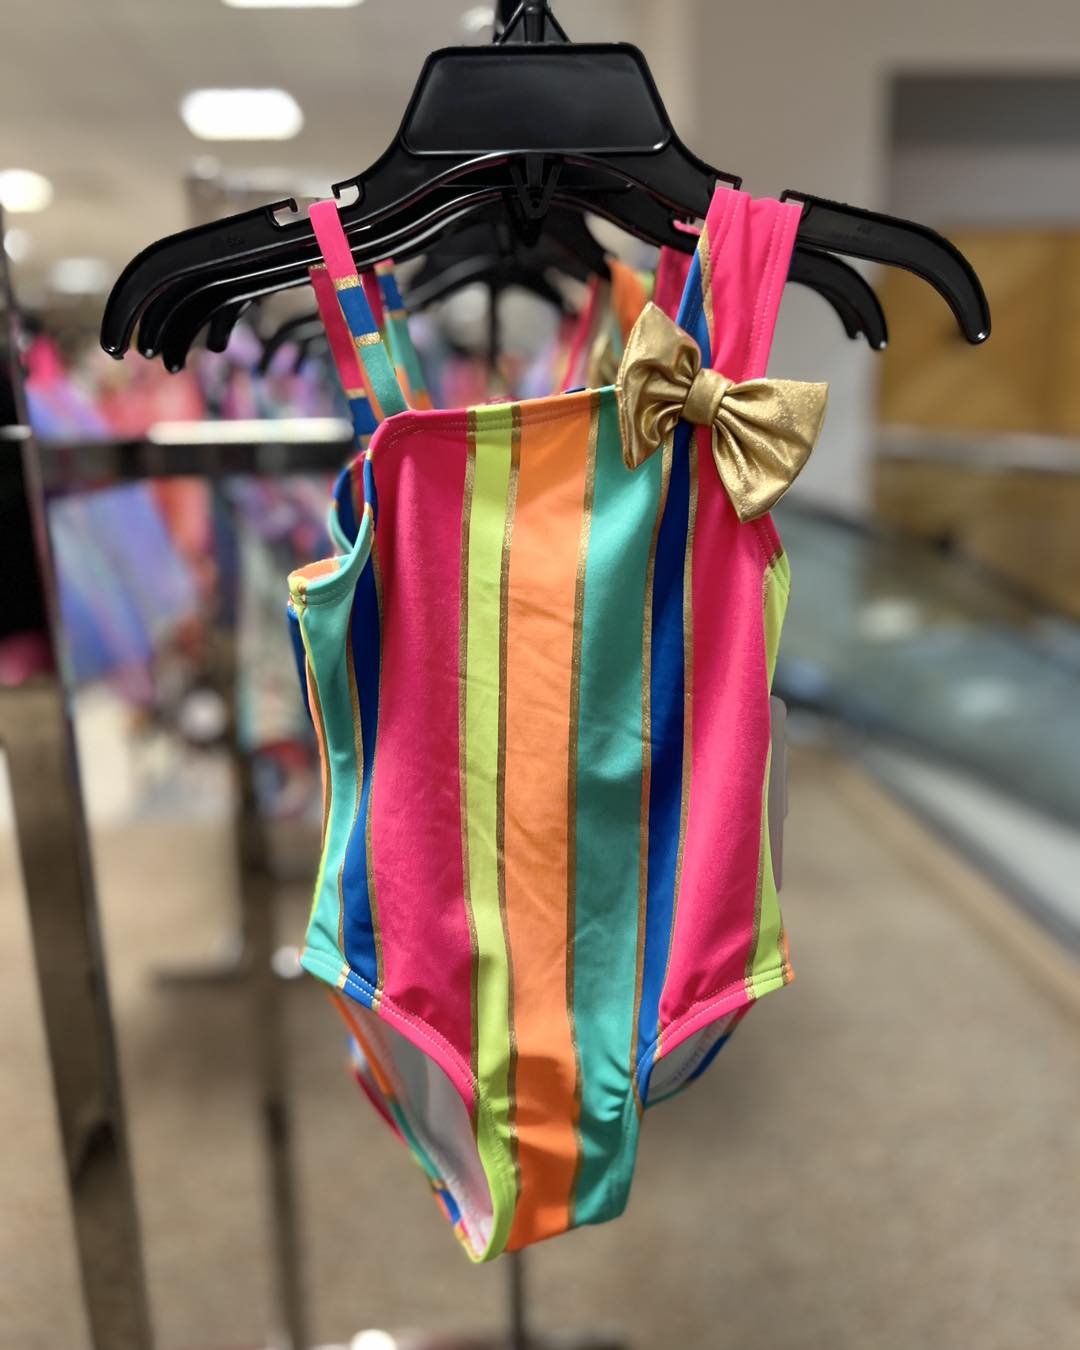 These kids swimsuits should come in adult sizes too! They are so cute, we all want them! Shop Dillard's for sunny styles. 😎🏝️